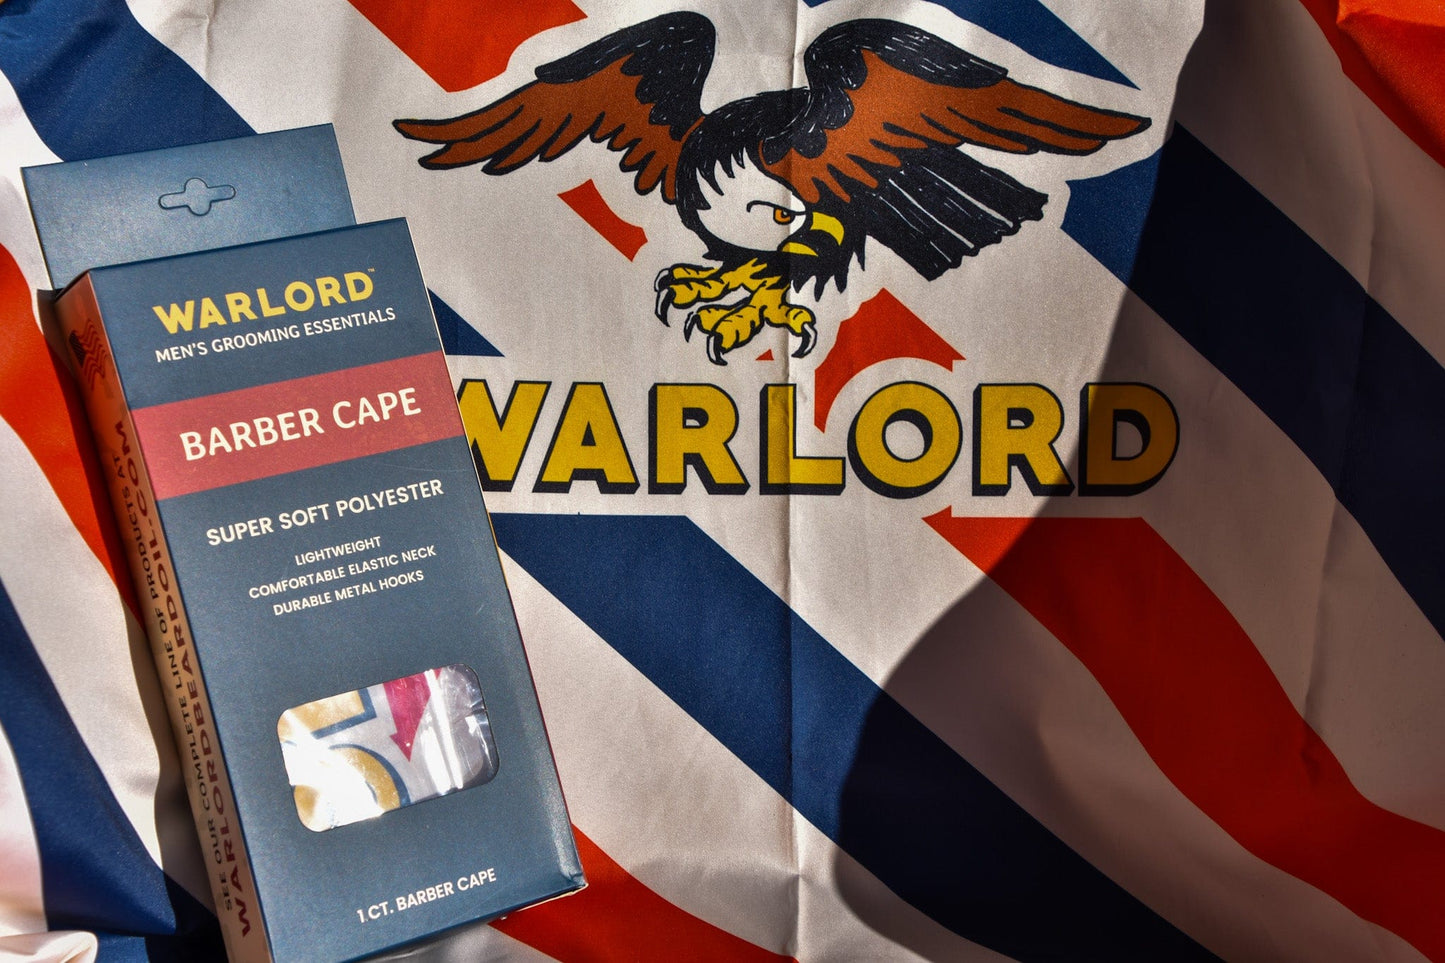 Warlord Barber Cape - Warlord - Men's Grooming Essentials